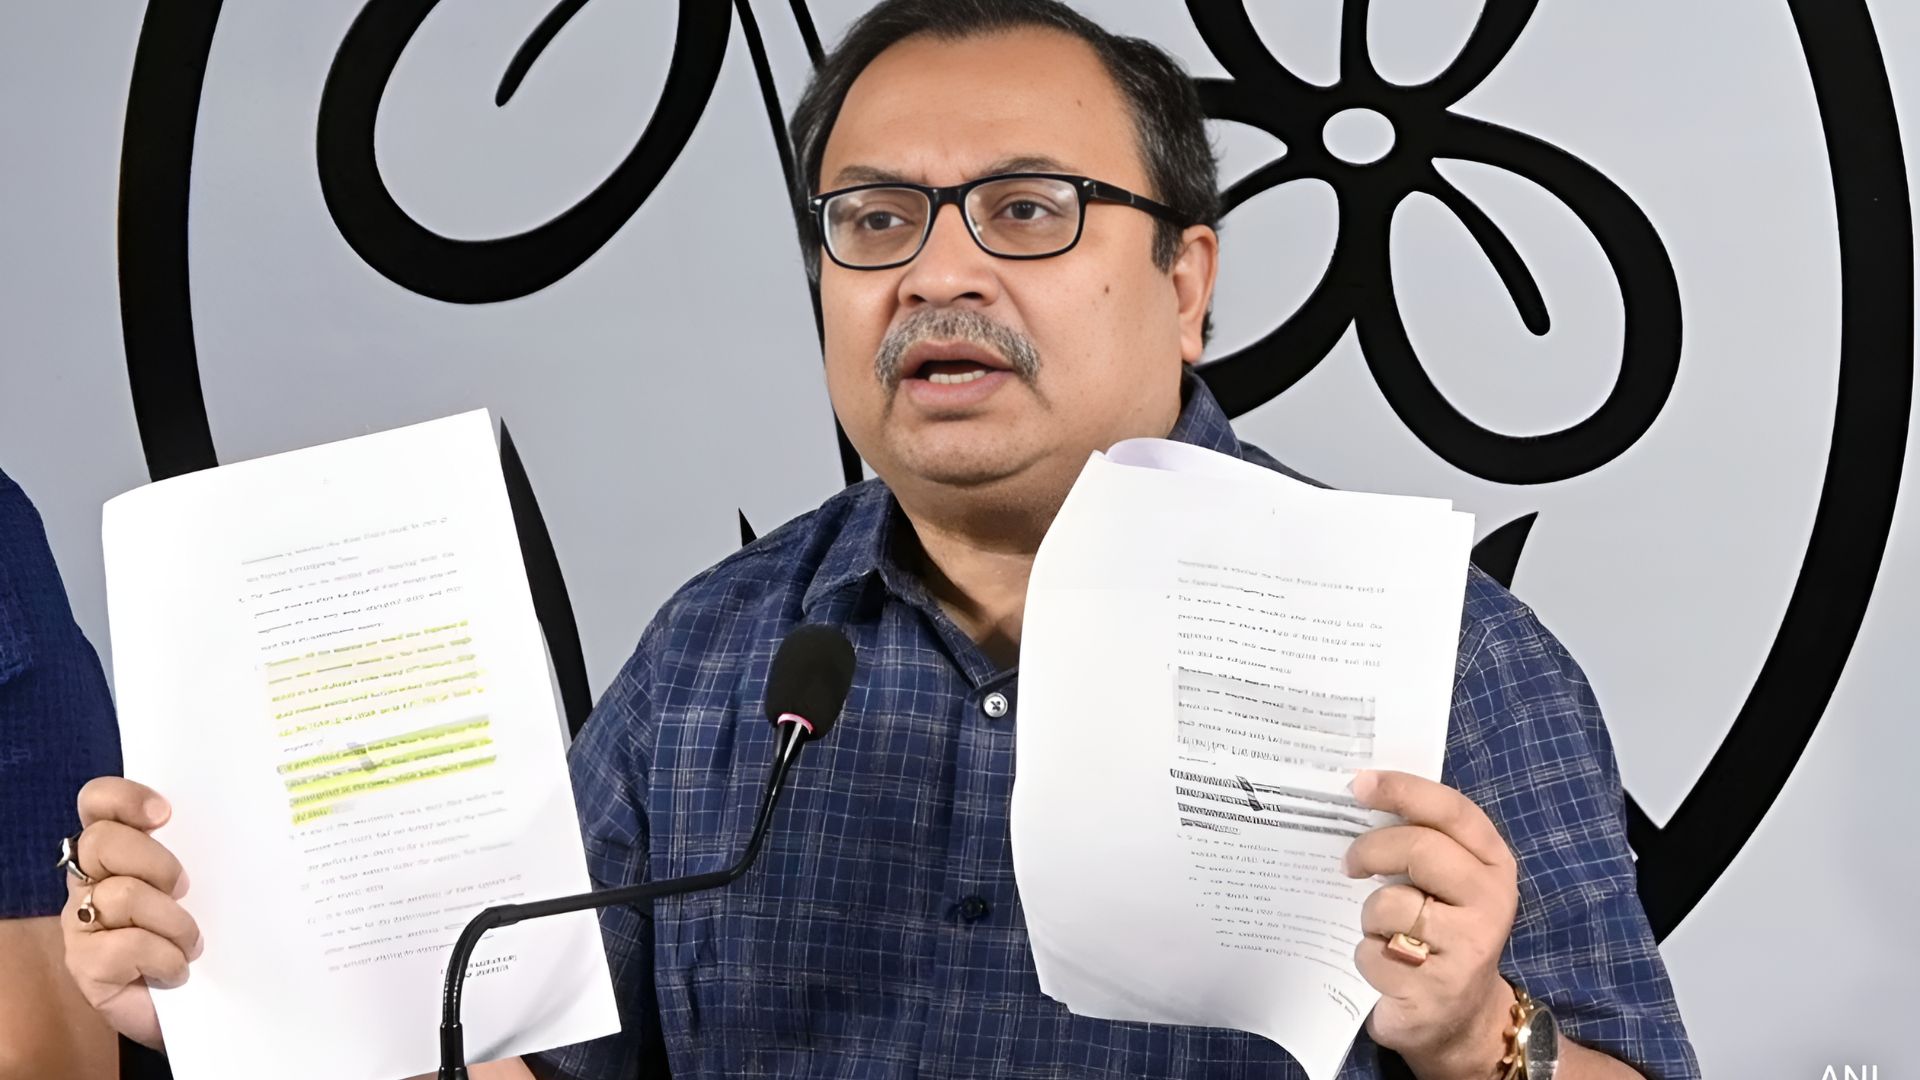 TMC Had Prior Knowledge of Job Scam, Could Have Prevented Disruption: Kunal Ghosh